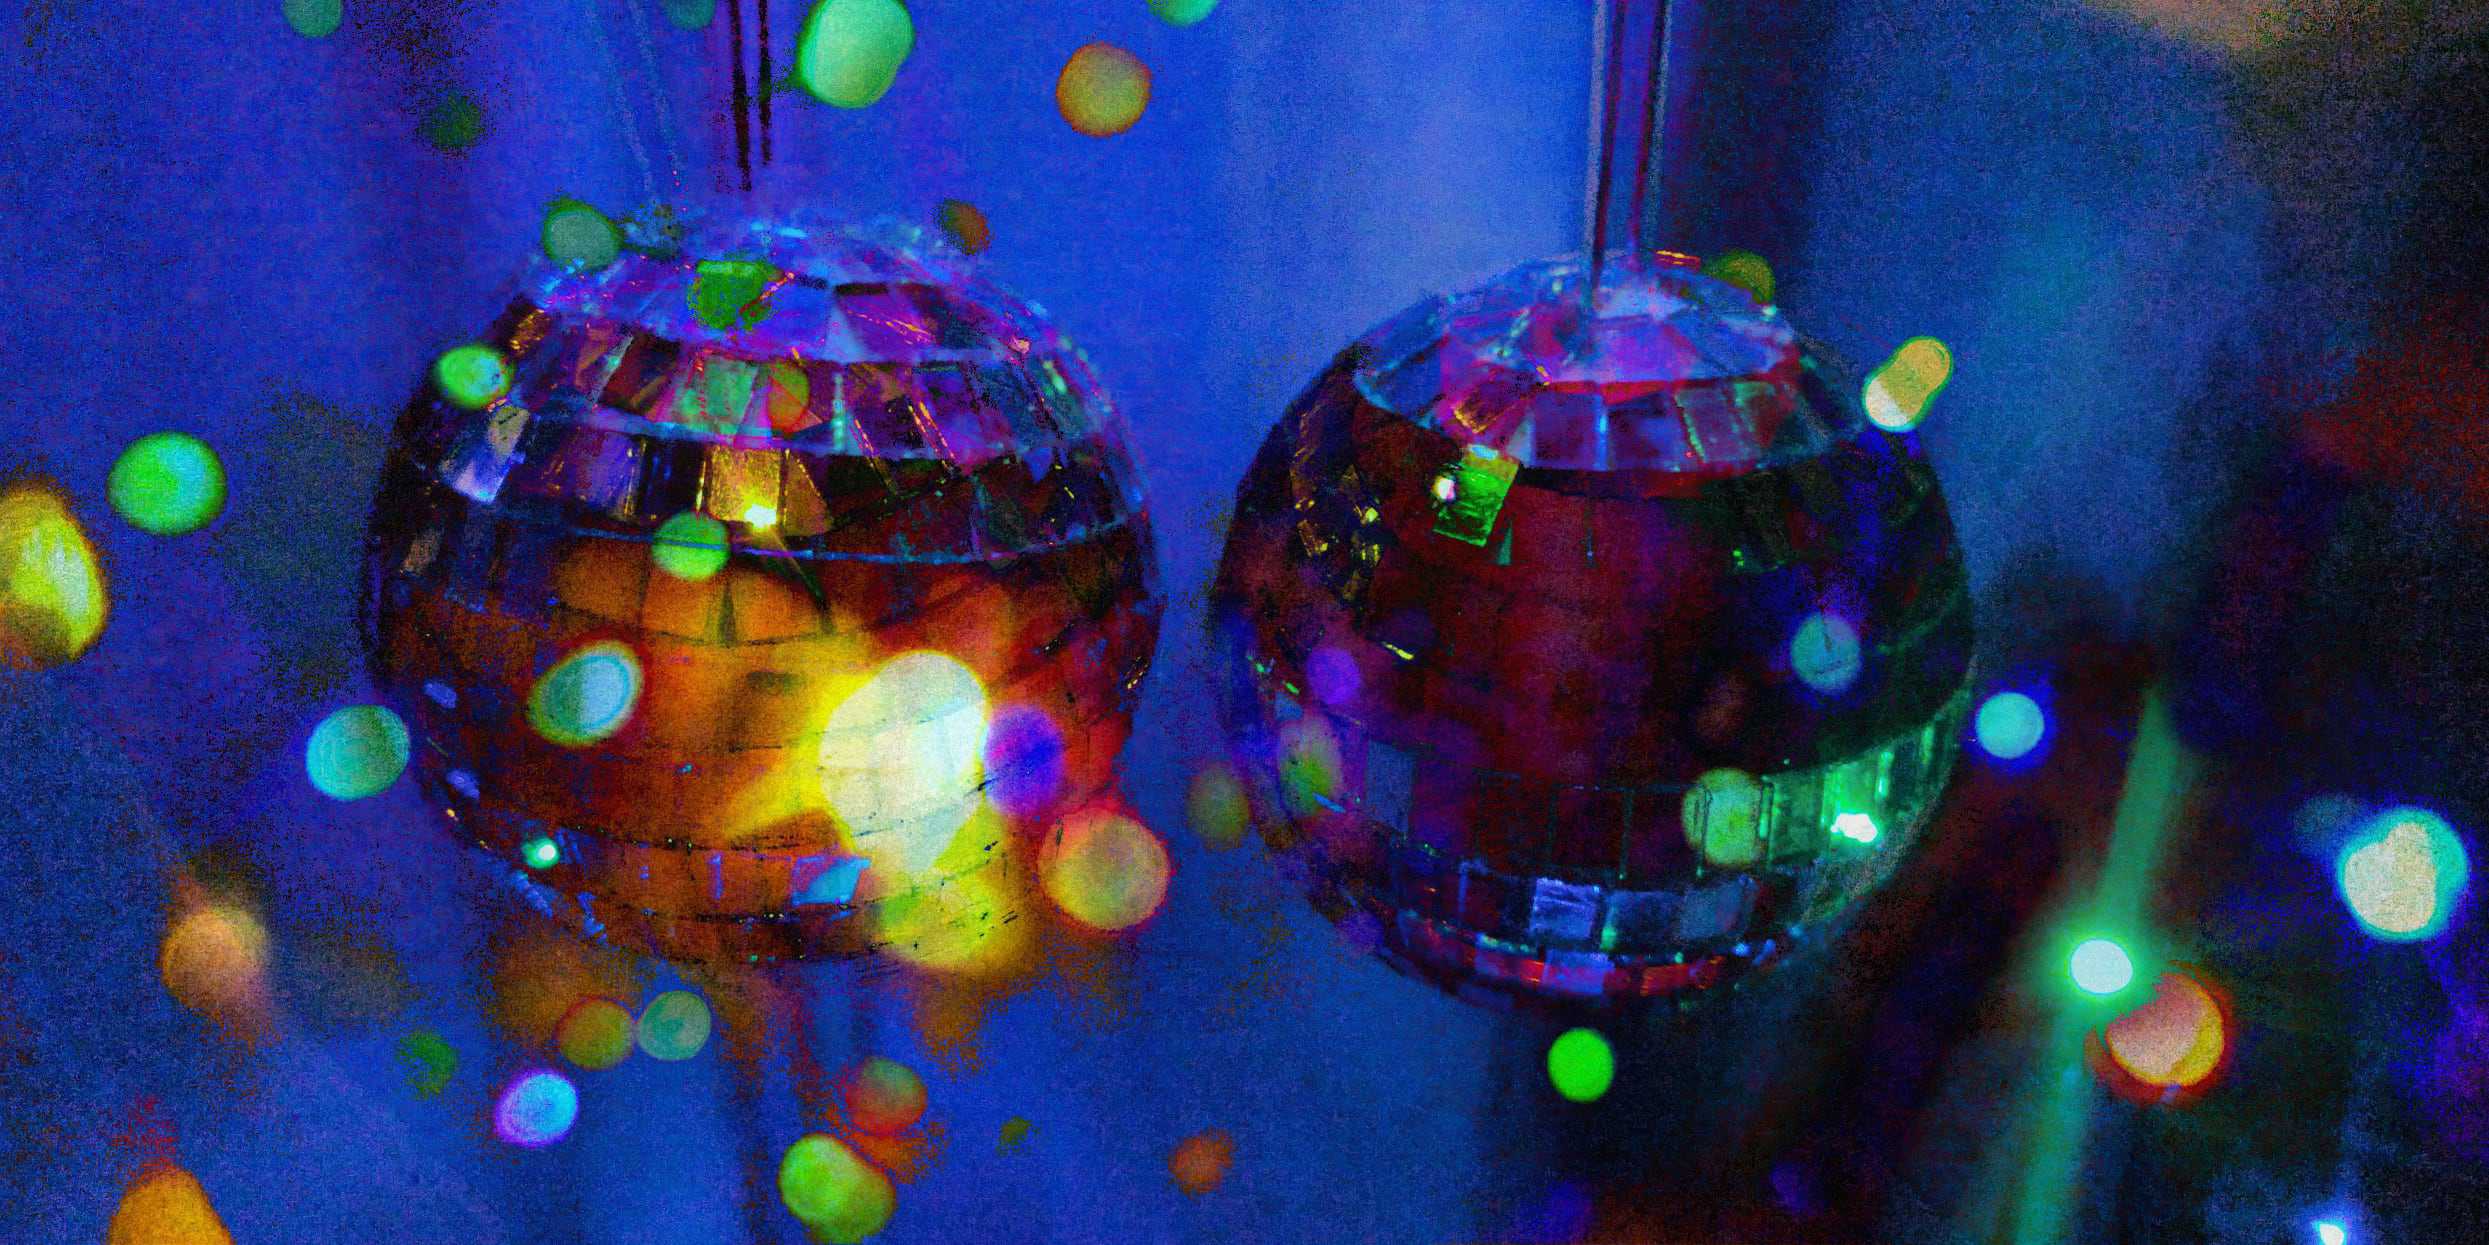 RC 295: Balls To Xmas eclectic mix of Christmas music and mashups - two tiny disco balls with fairy lights